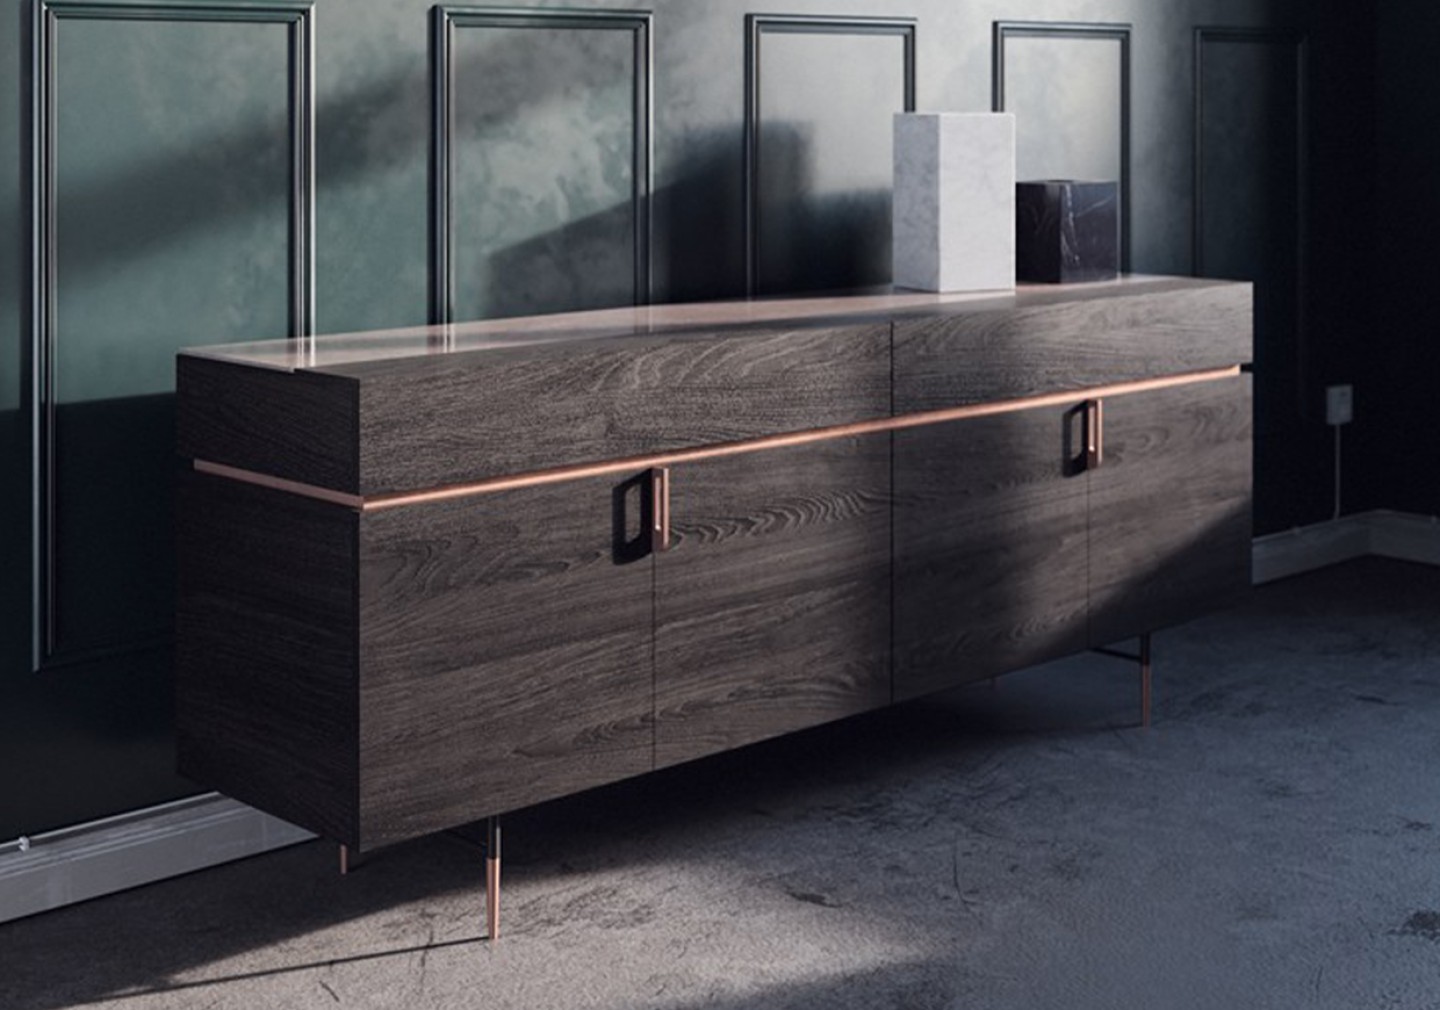 THE CASSETTONE SIDEBOARD